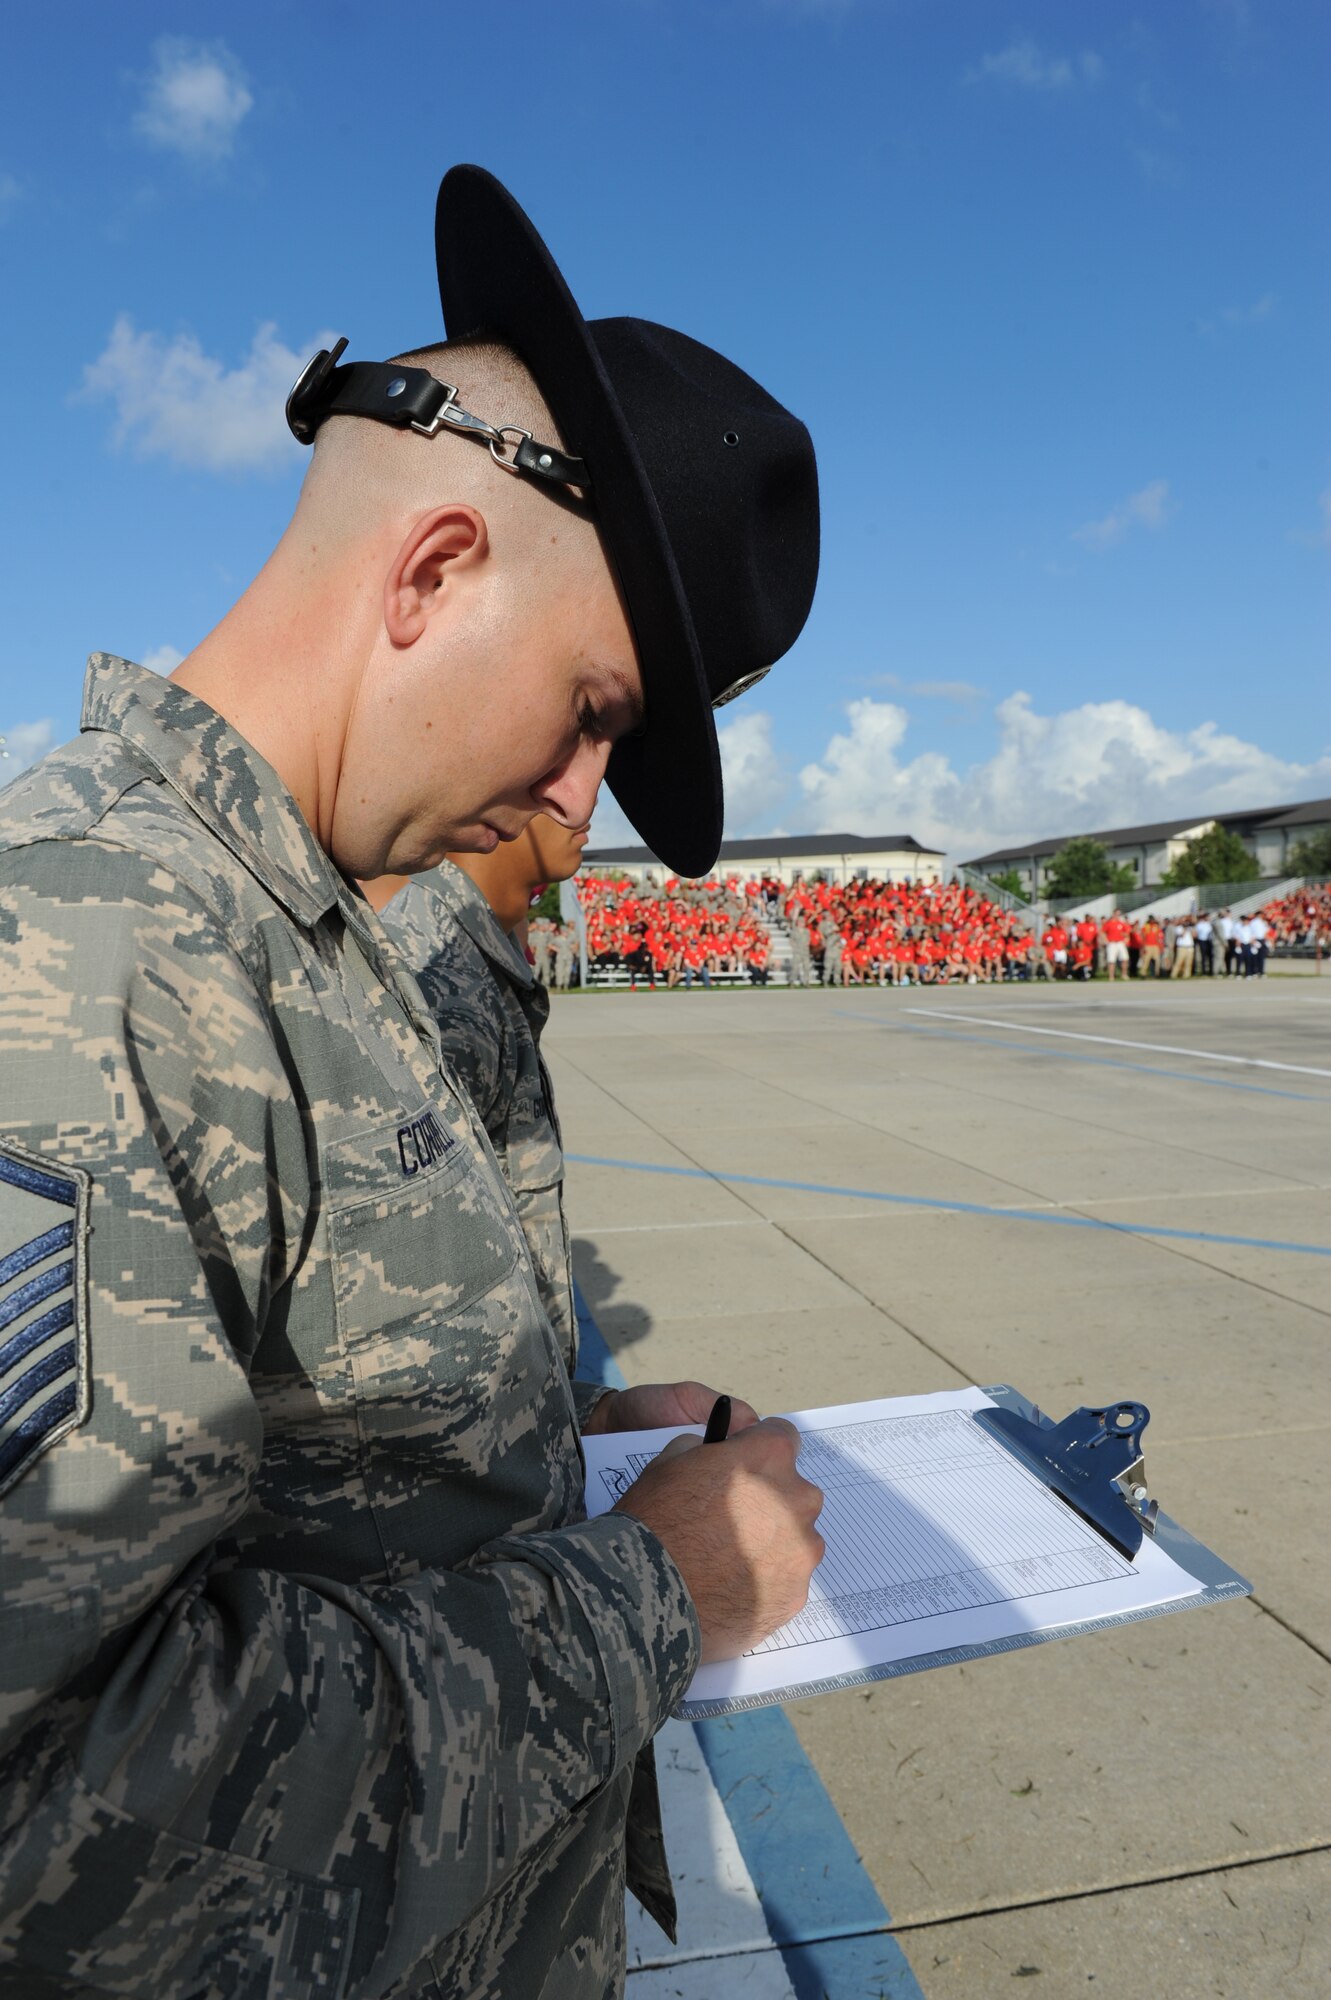 Master Sgt. James Correll, 2nd Air Force military training instructor, serves as a judge during the 81st Training Group drill down at the Levitow Training Support Facility drill pad Sept. 9, 2016, on Keesler Air Force Base, Miss. The 334th TRS “Gators” placed first in open ranks, regulation and overall. (U.S. Air Force photo by Kemberly Groue/Released)